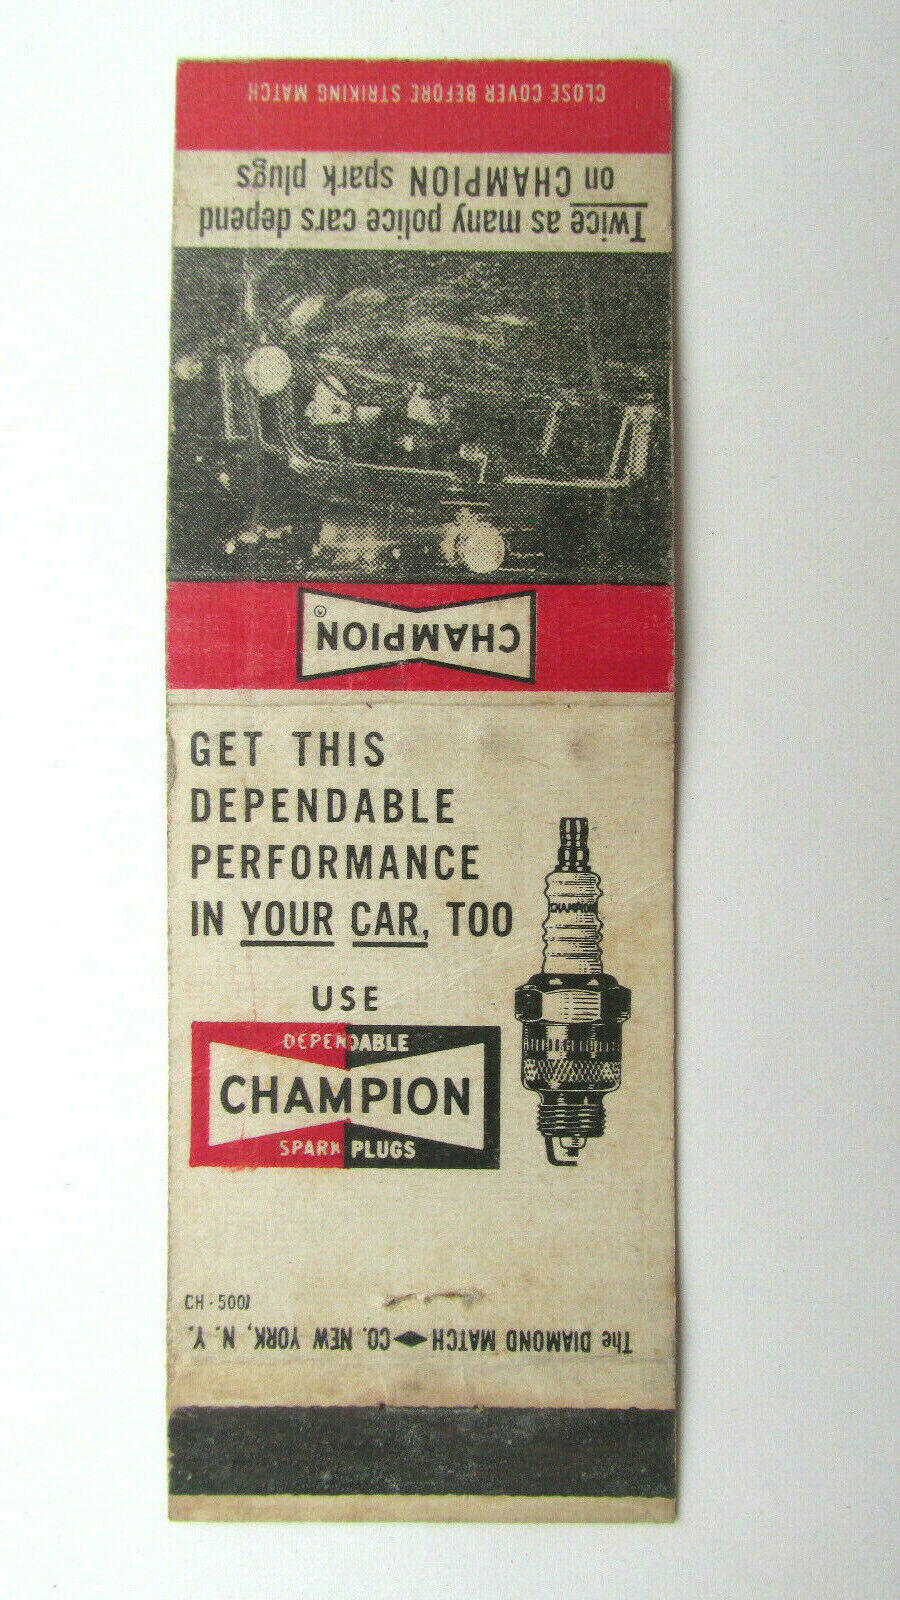 Champion Spark Plugs Ad Police Cars 20 Strike Matchbook Cover Diamond Match Co. - $2.00